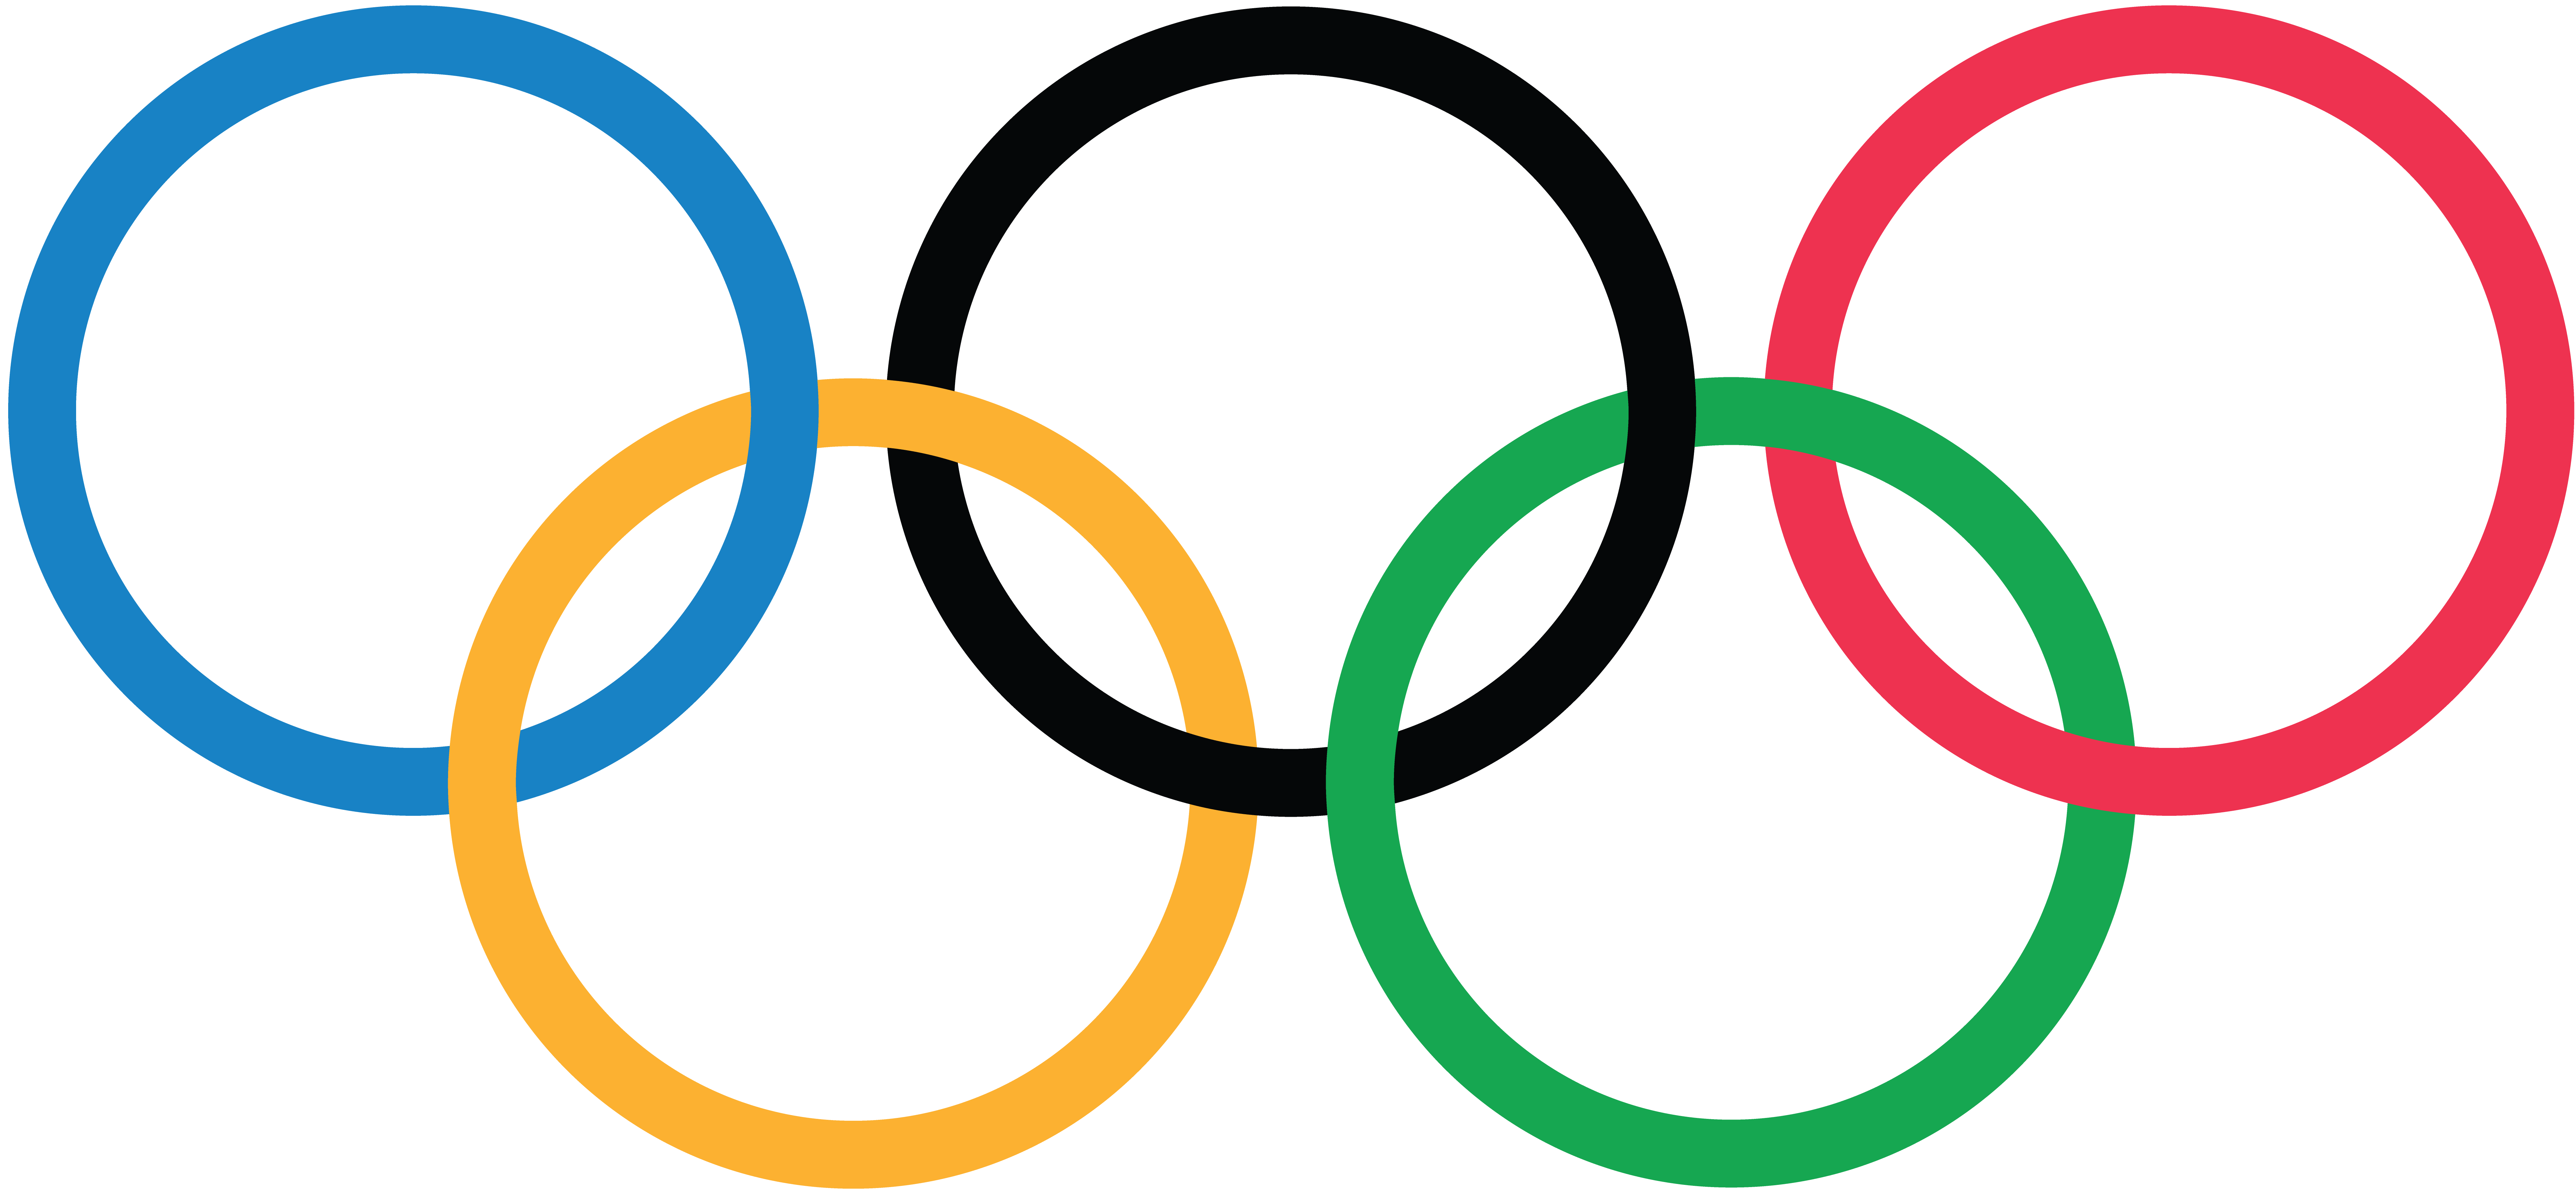 Olympic Games Rings